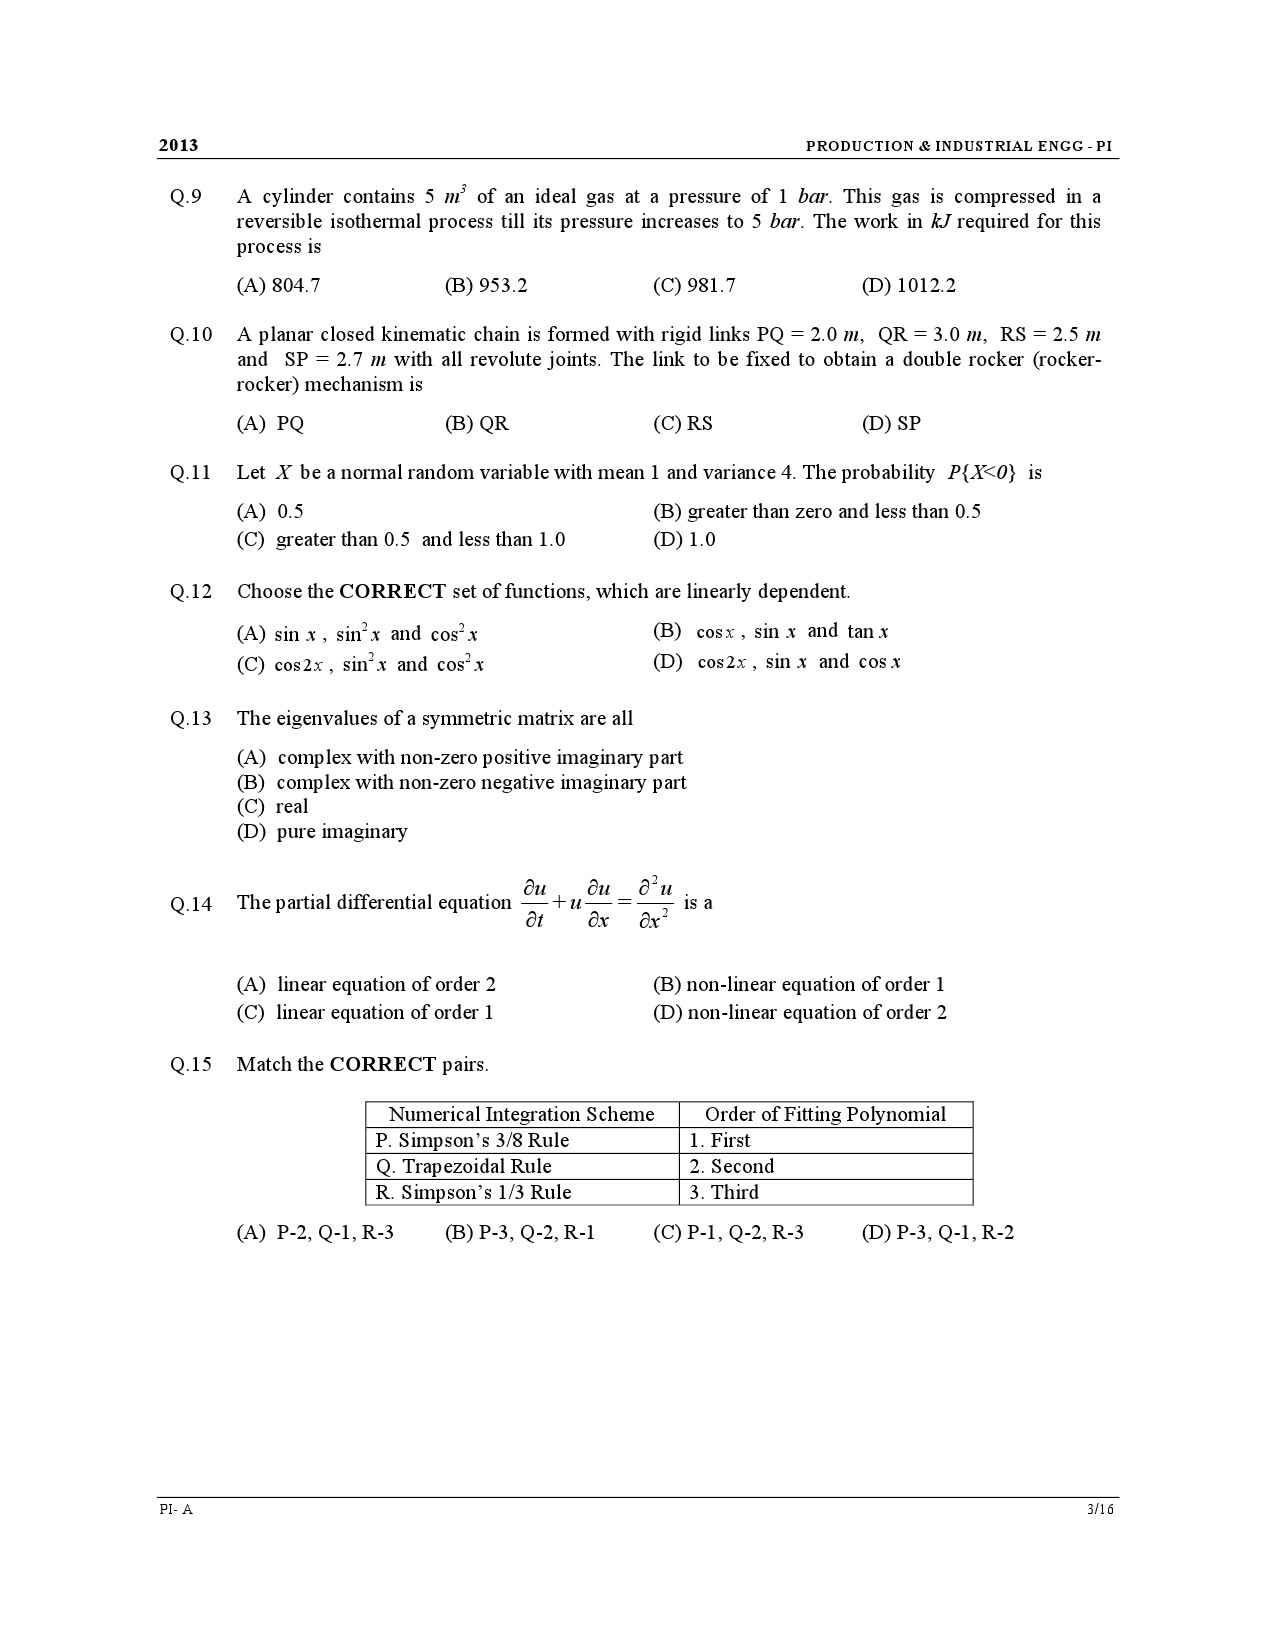 GATE Exam Question Paper 2013 Production and Industrial Engineering 3